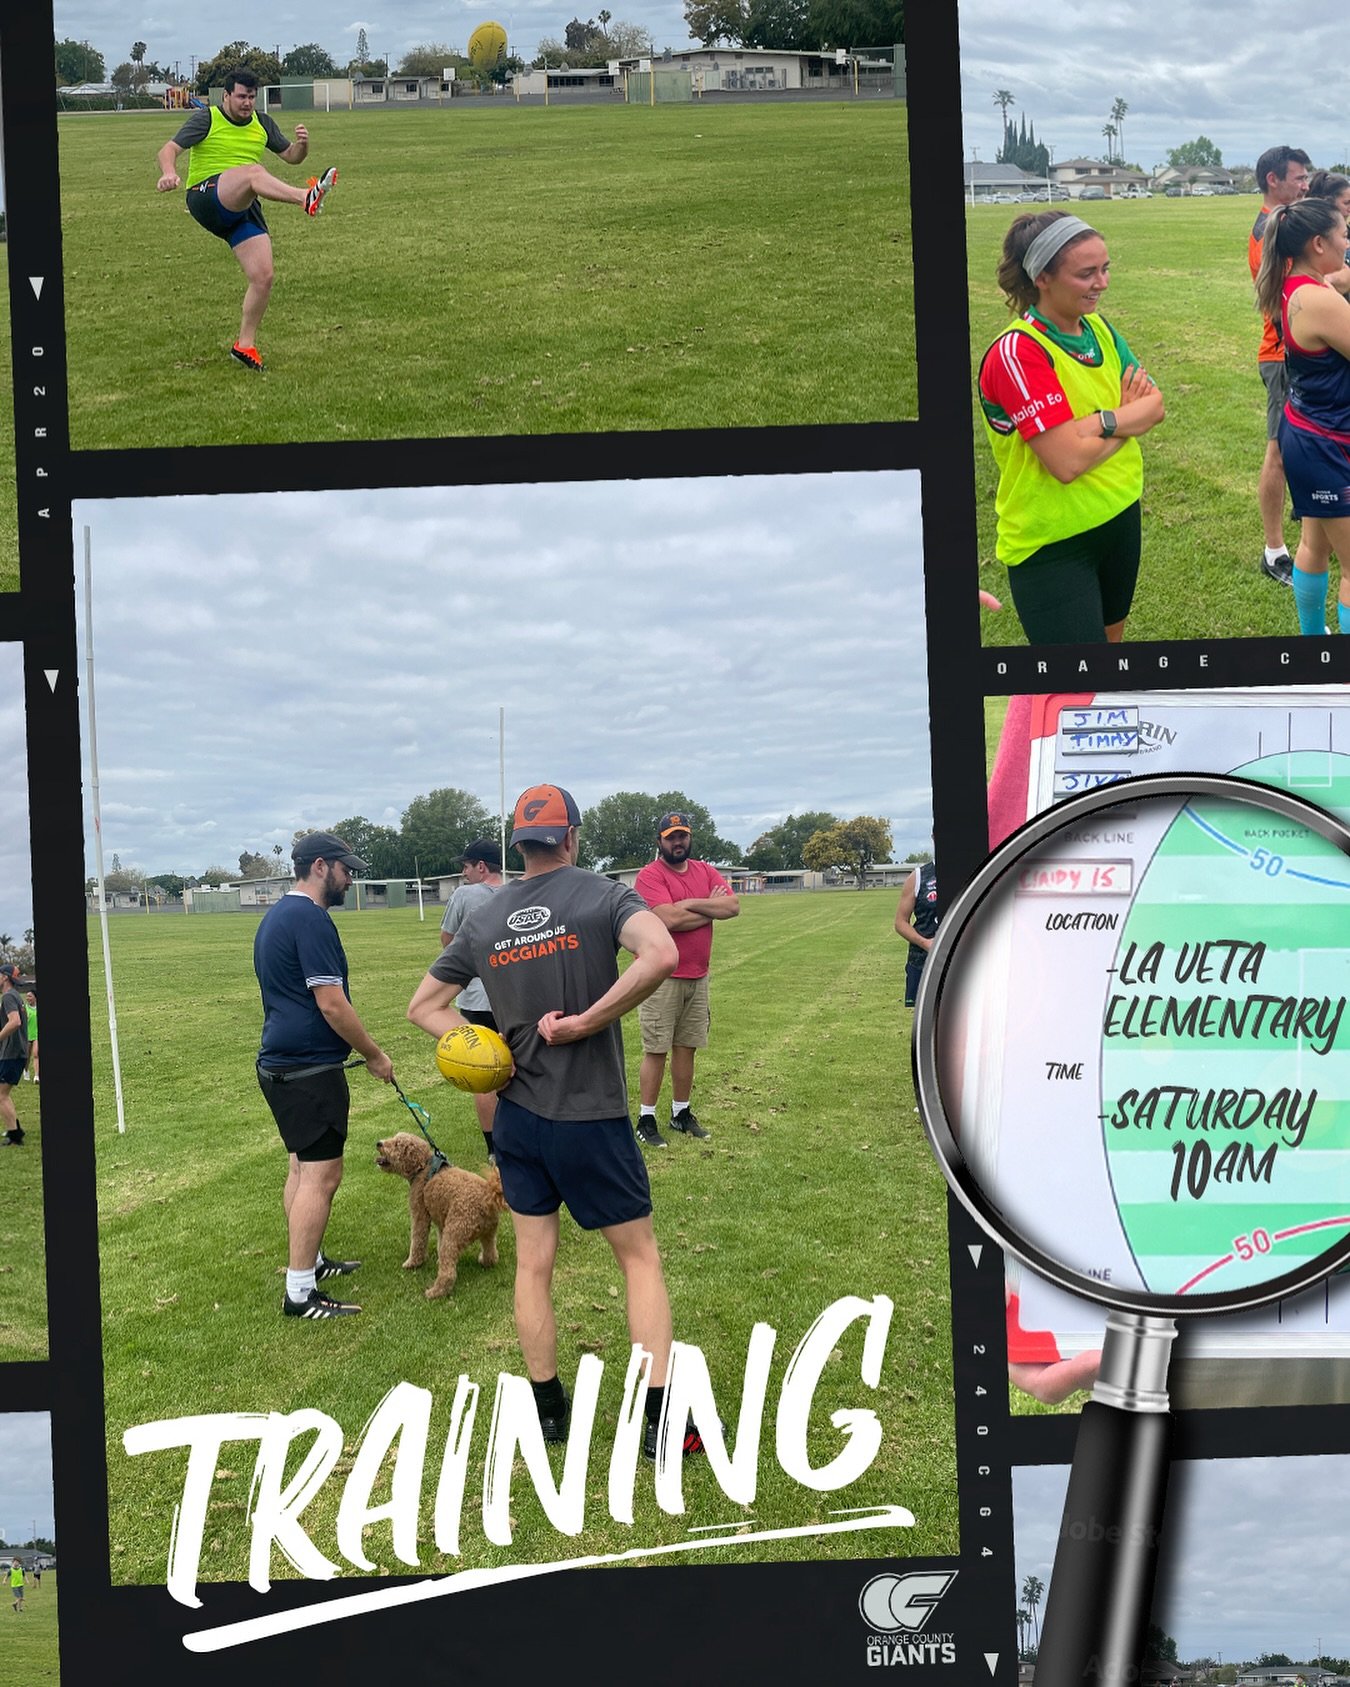 Giant main training before our road trip to Arizona and first game of season &lsquo;24! 🚌 🏜️🏉
&zwnj;
Again, for those interested in working on kicking technique there will be a Kick2Kick held at 9:30am prior to the start of training.
&zwnj;
10am S